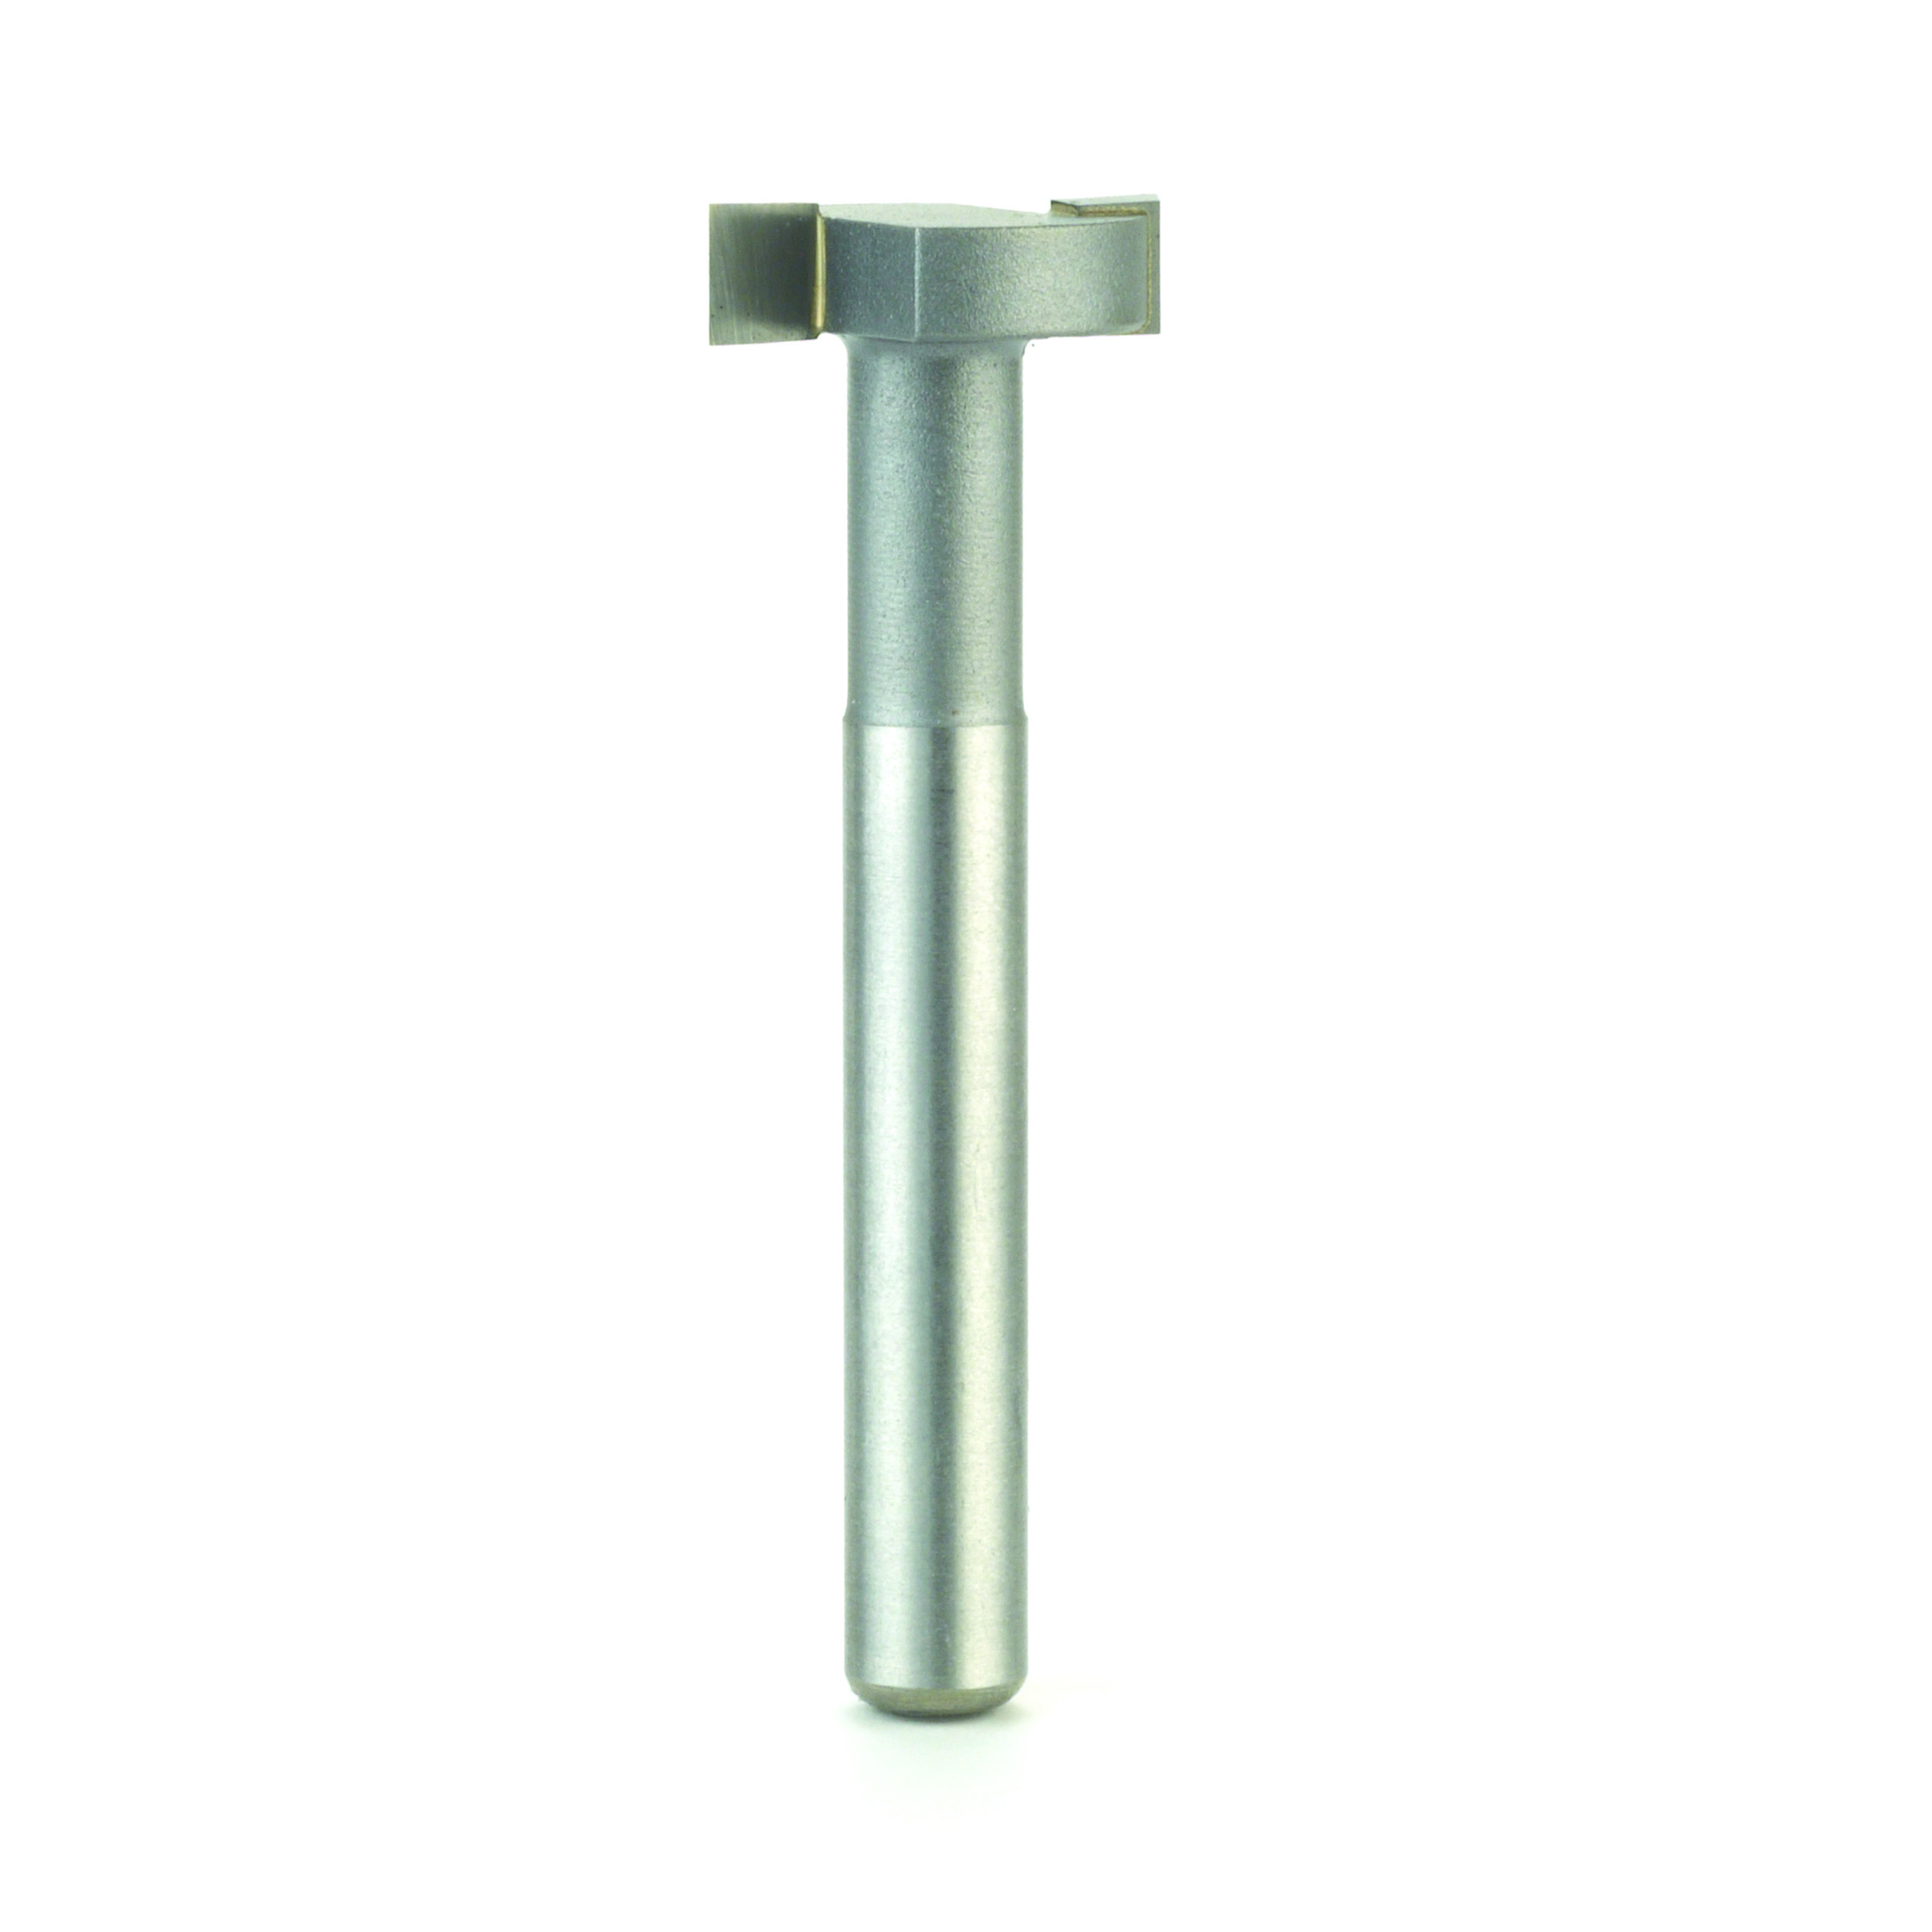 98-389 Small T-slot Router Bit